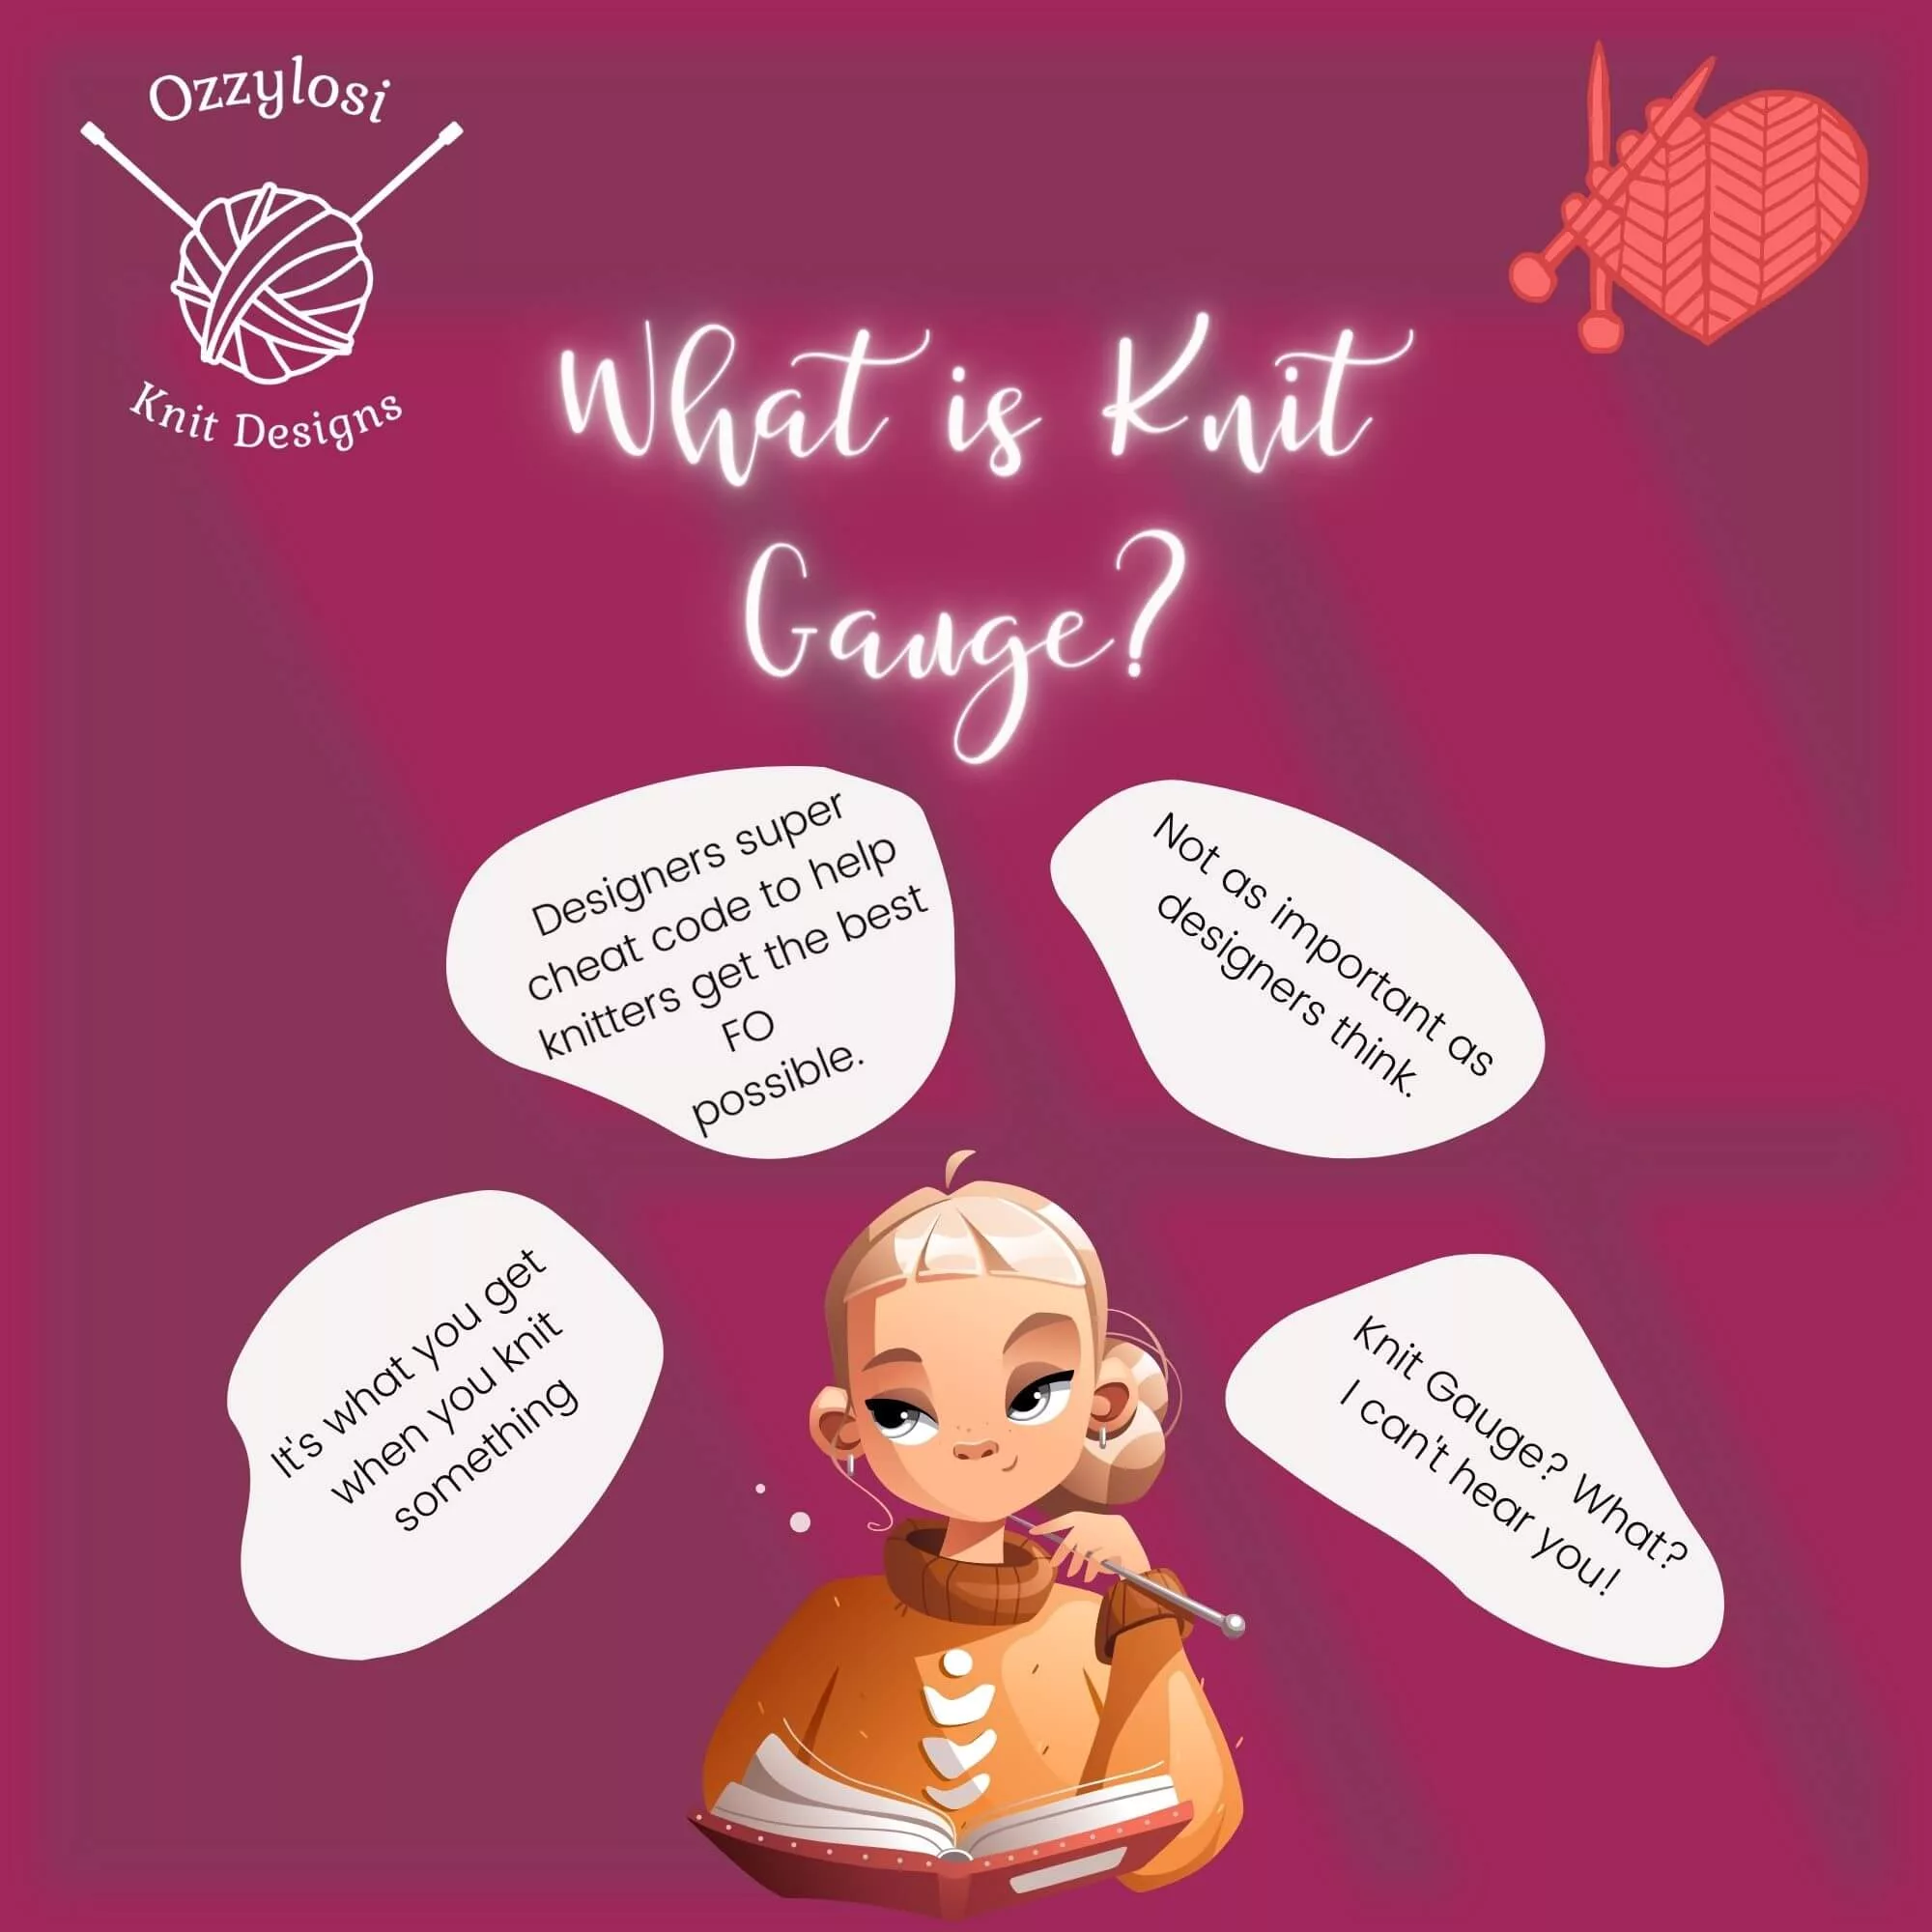 What is knit gauge?